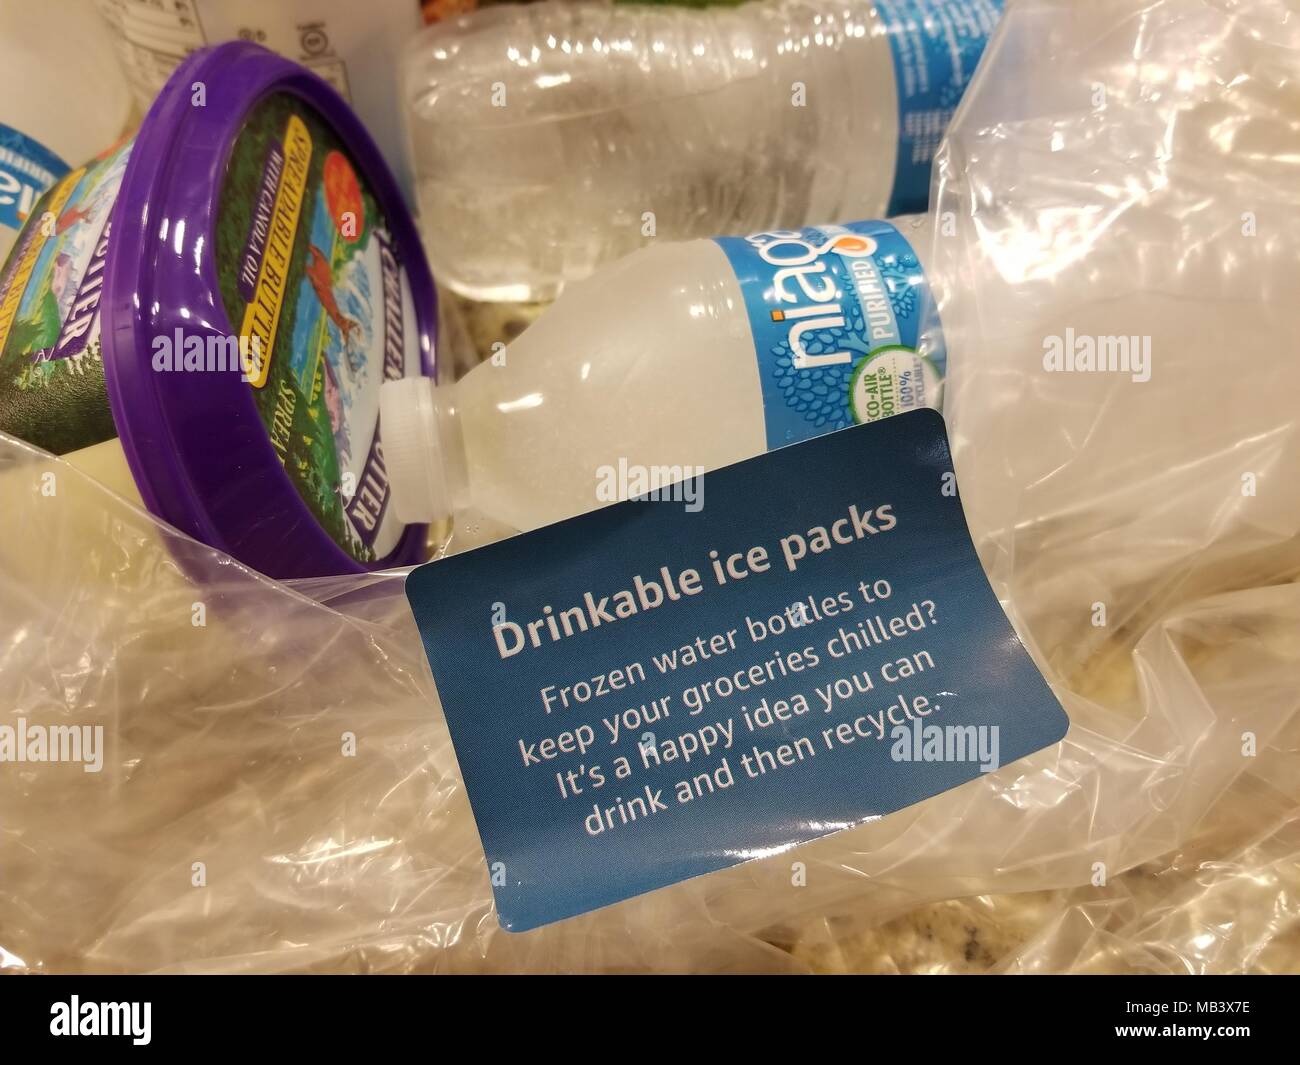 Amazon Fresh grocery delivery order packed with frozen bottled water in  place of disposable ice packs, as part of new sustainability initiatives  from Amazon.com, San Ramon, California, March 28, 2018 Stock Photo -